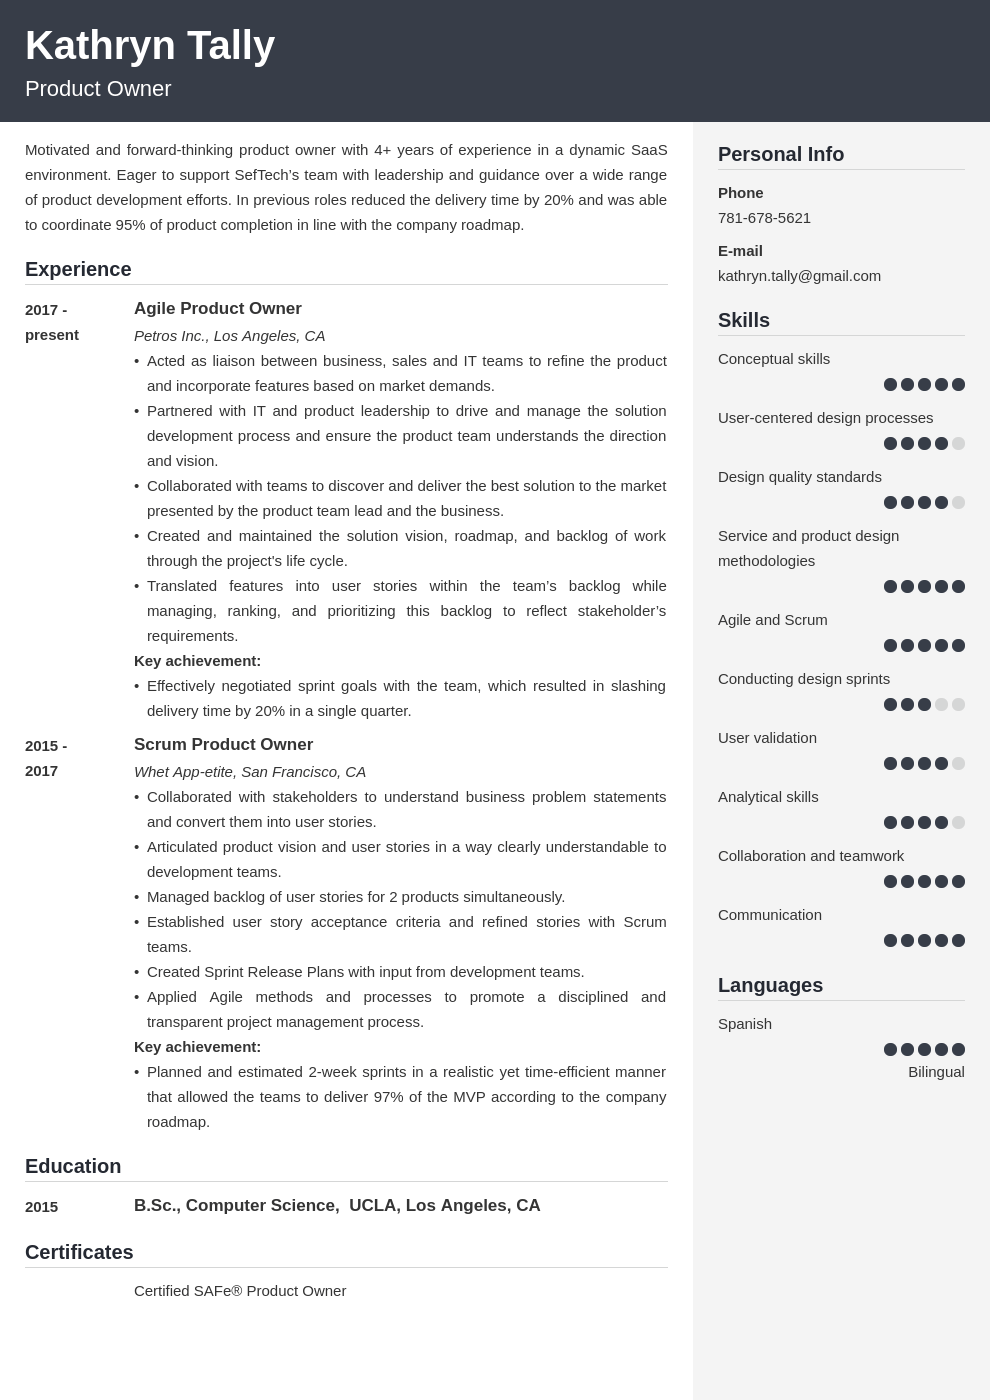 Product Owner Resume Examples [20 Skills, Summaries, Tips]